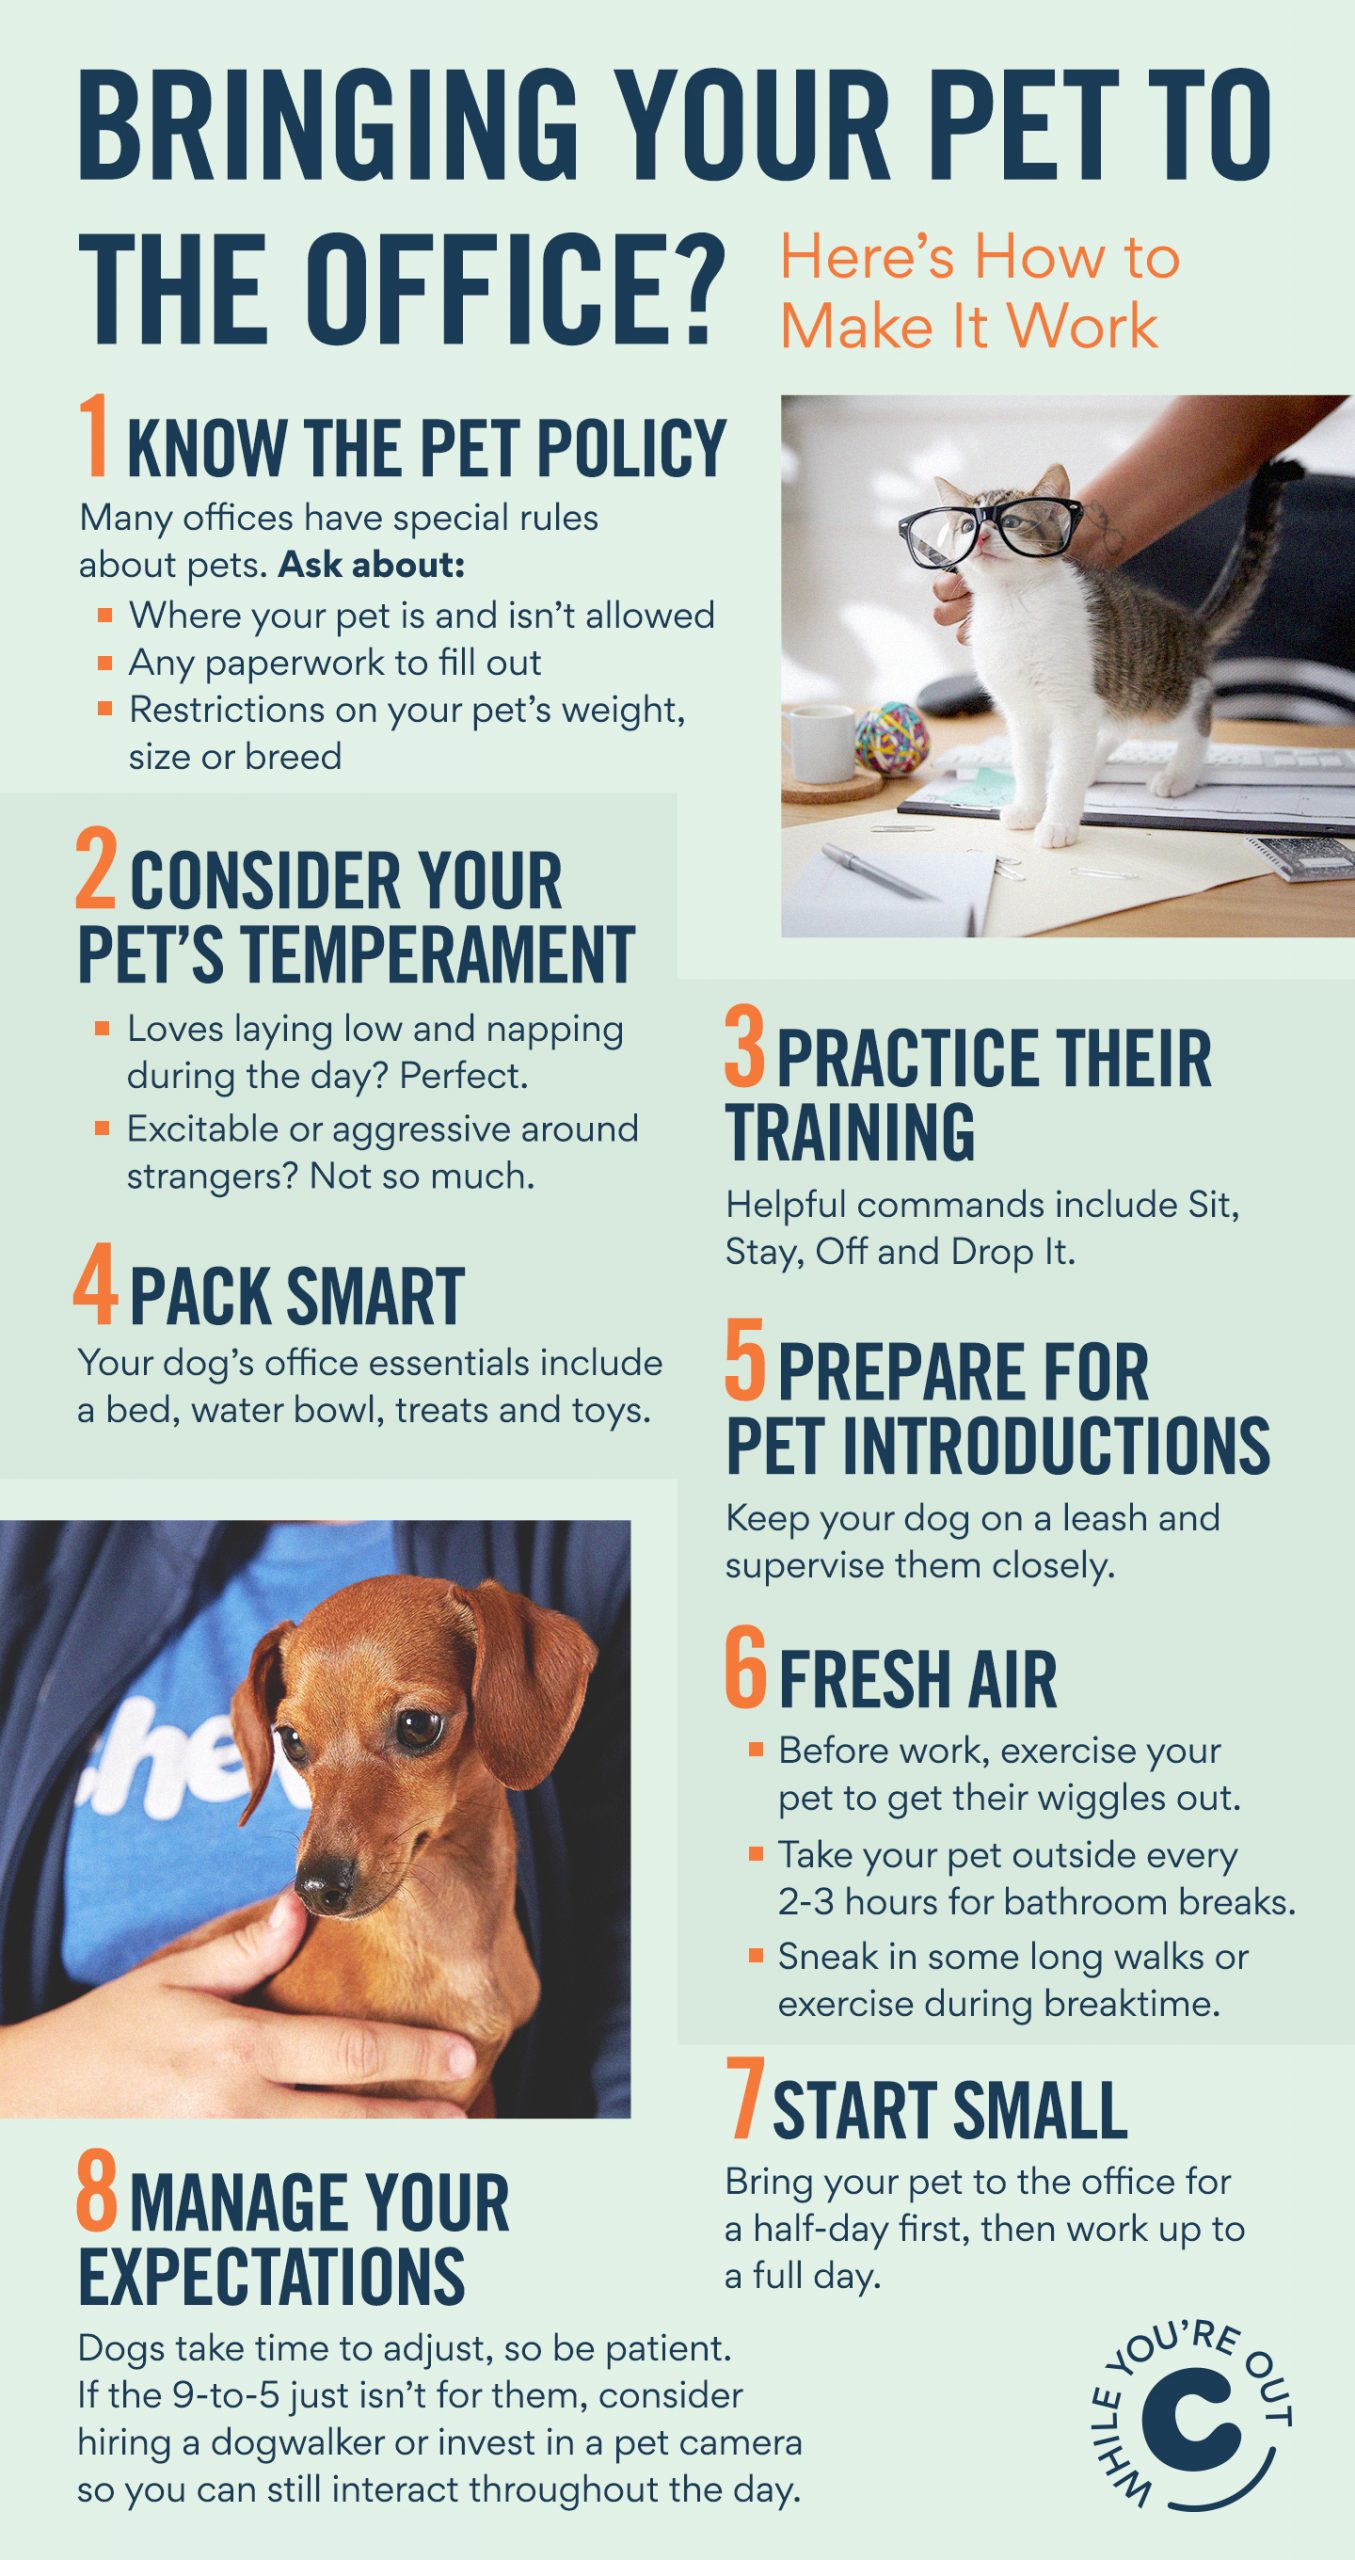 5 Ways to Keep the Dog Entertained While You're at Work - Petful